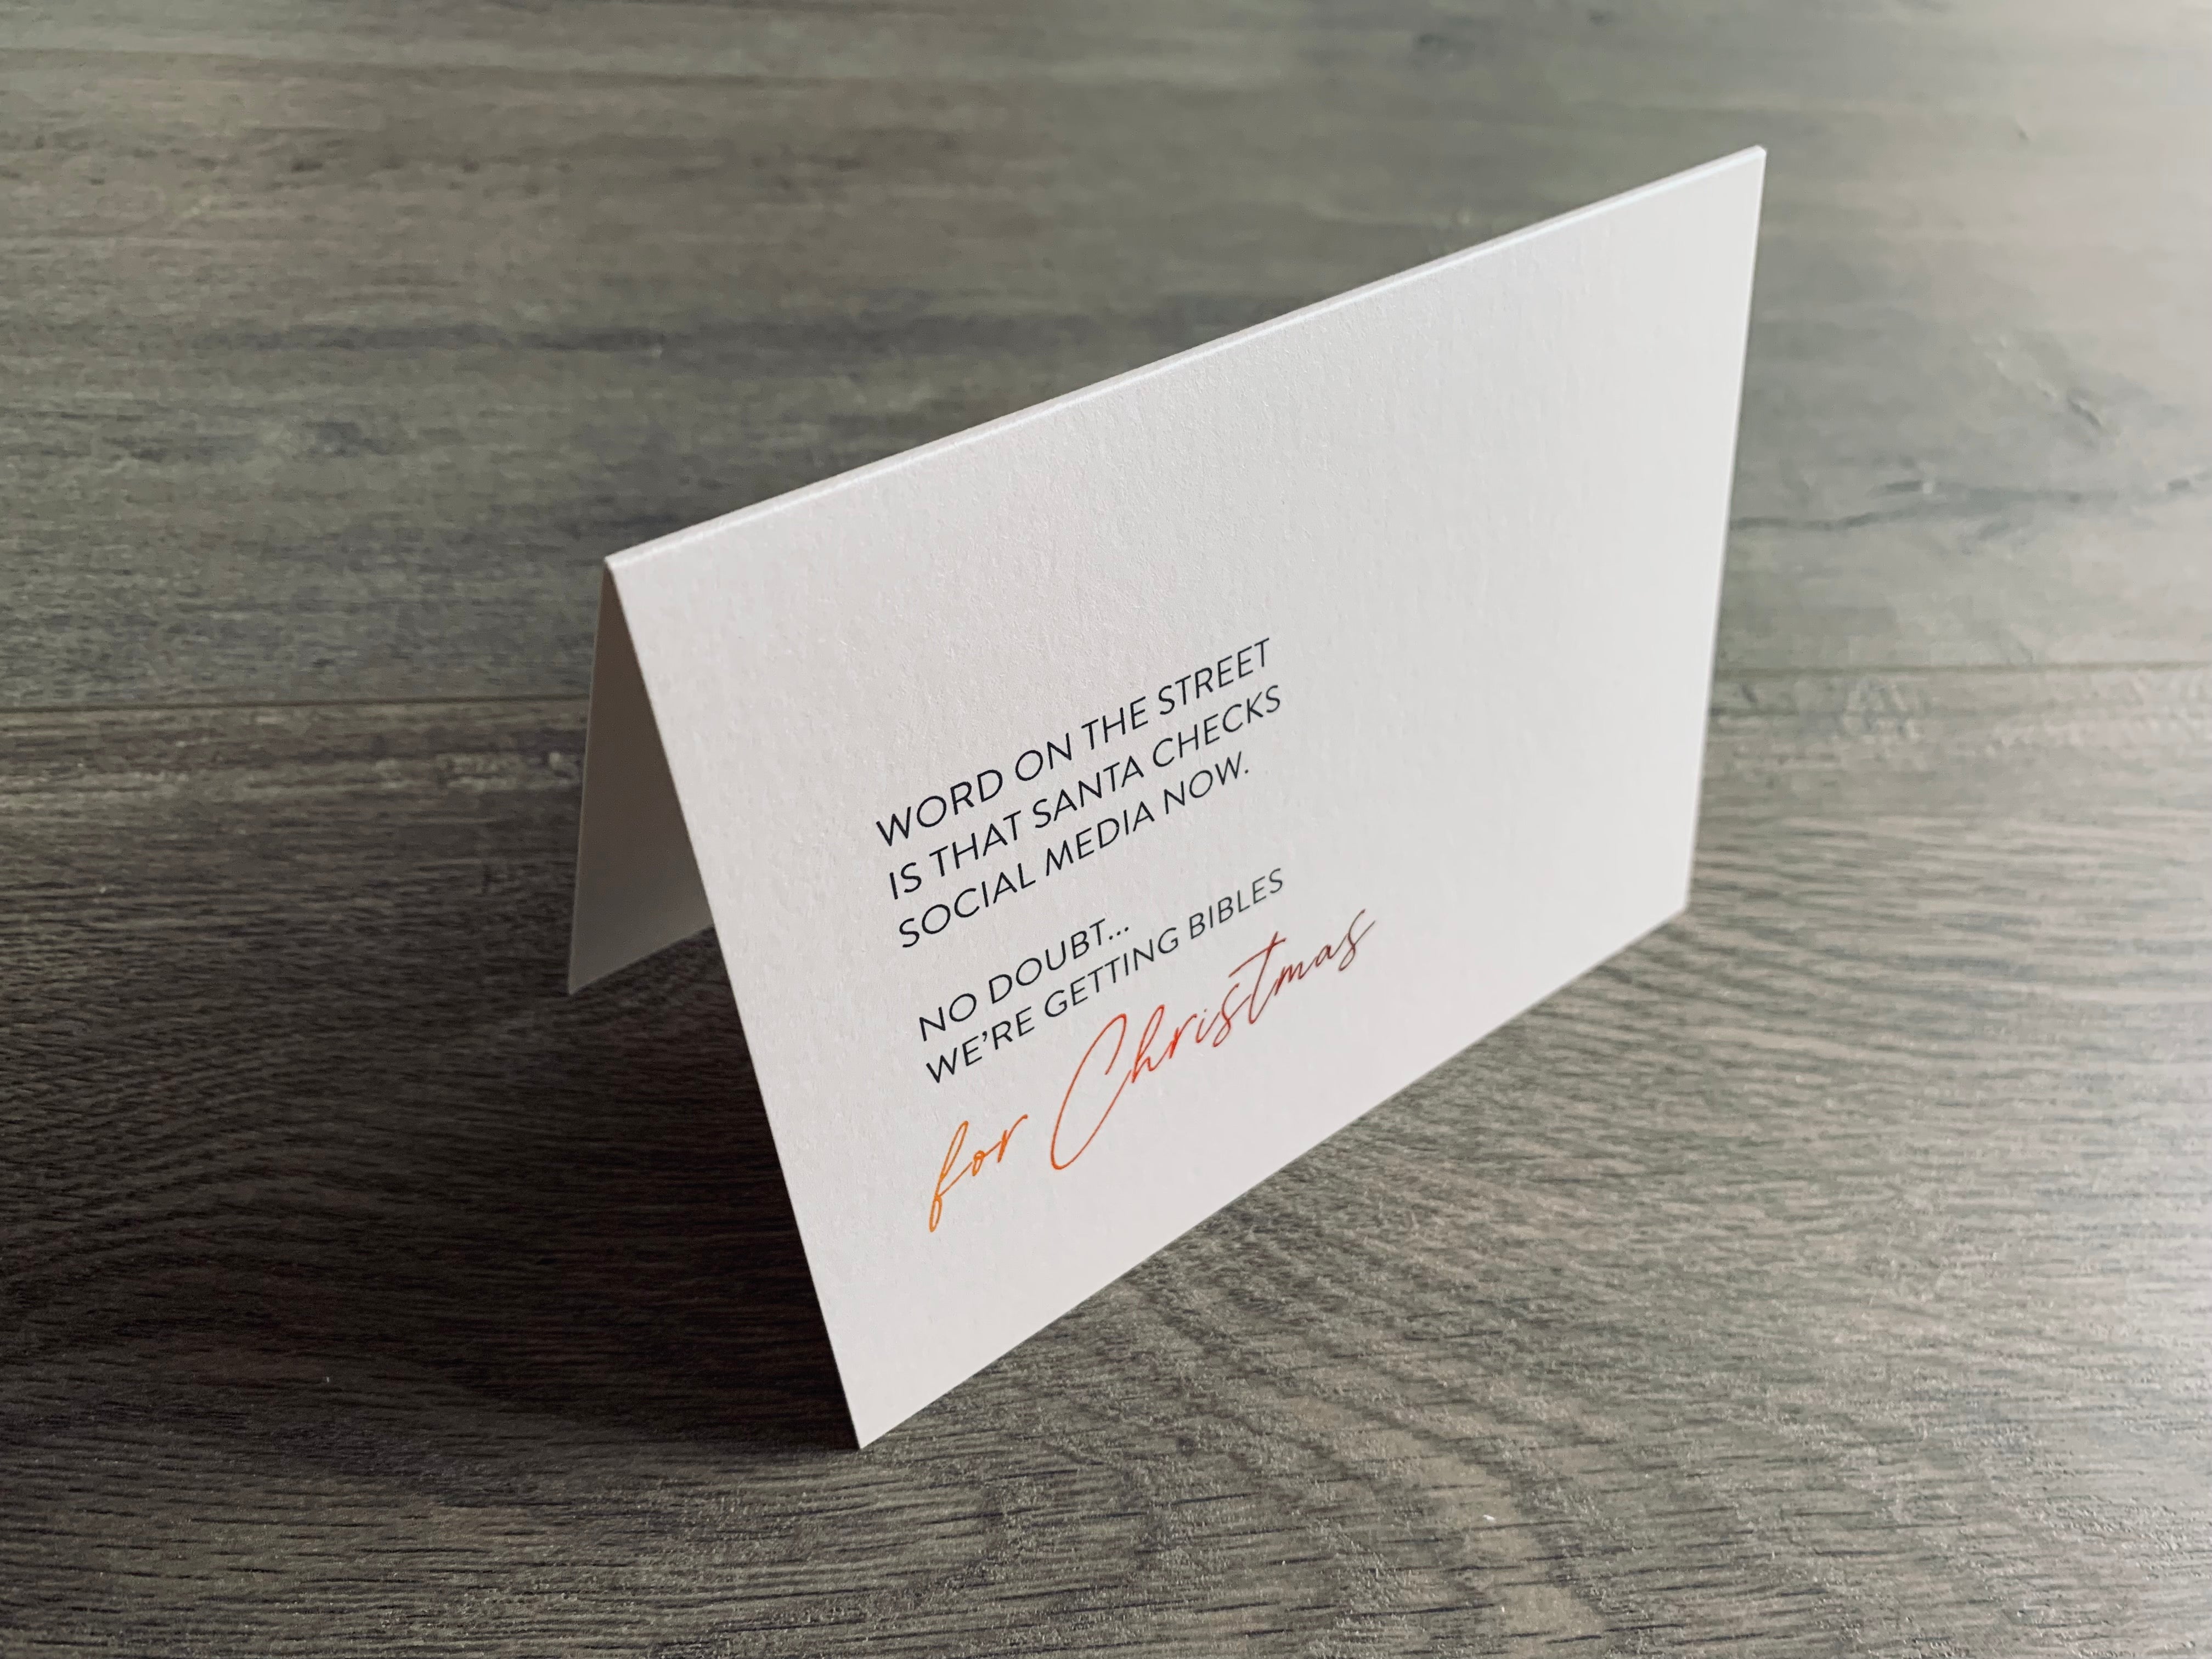 A folded notecard is propped up on a gray wood floor. The notecard is of a cream-colored pearlized paper. The card says, "Word on the street is that Santa checks social media now. No doubt... we're getting bibles for Christmas." Christmas Chuckles collection by Stationare.